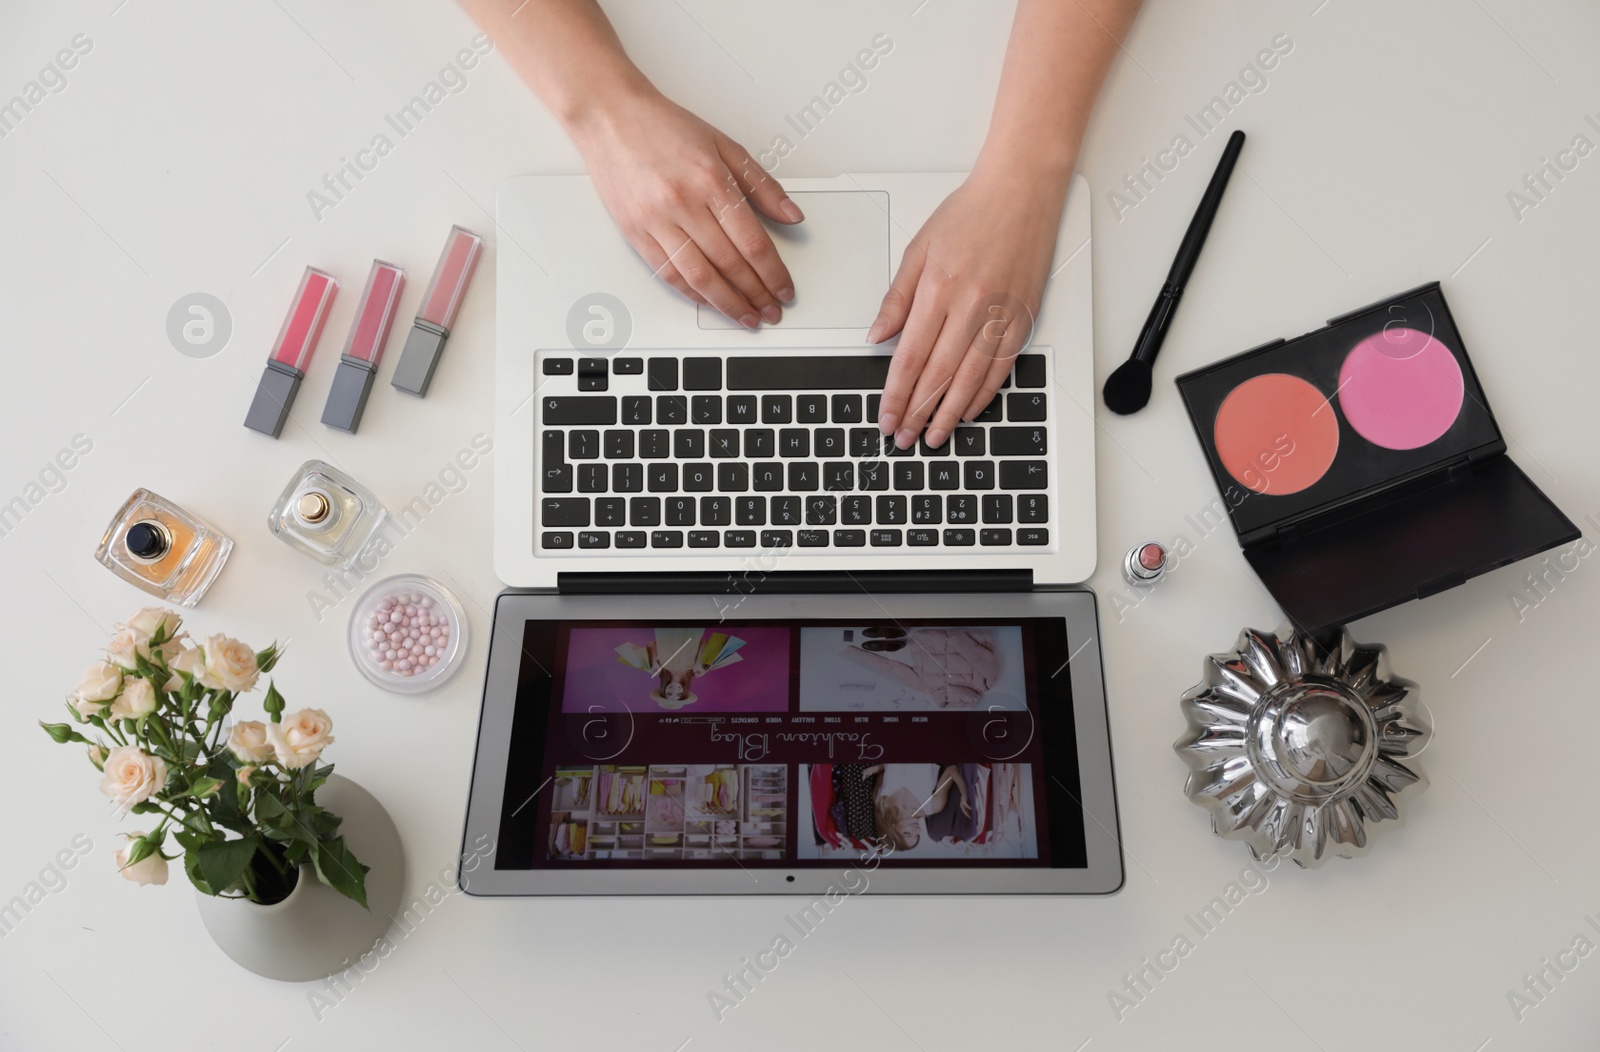 Photo of Woman working with fashion blogger site on laptop at table, top view